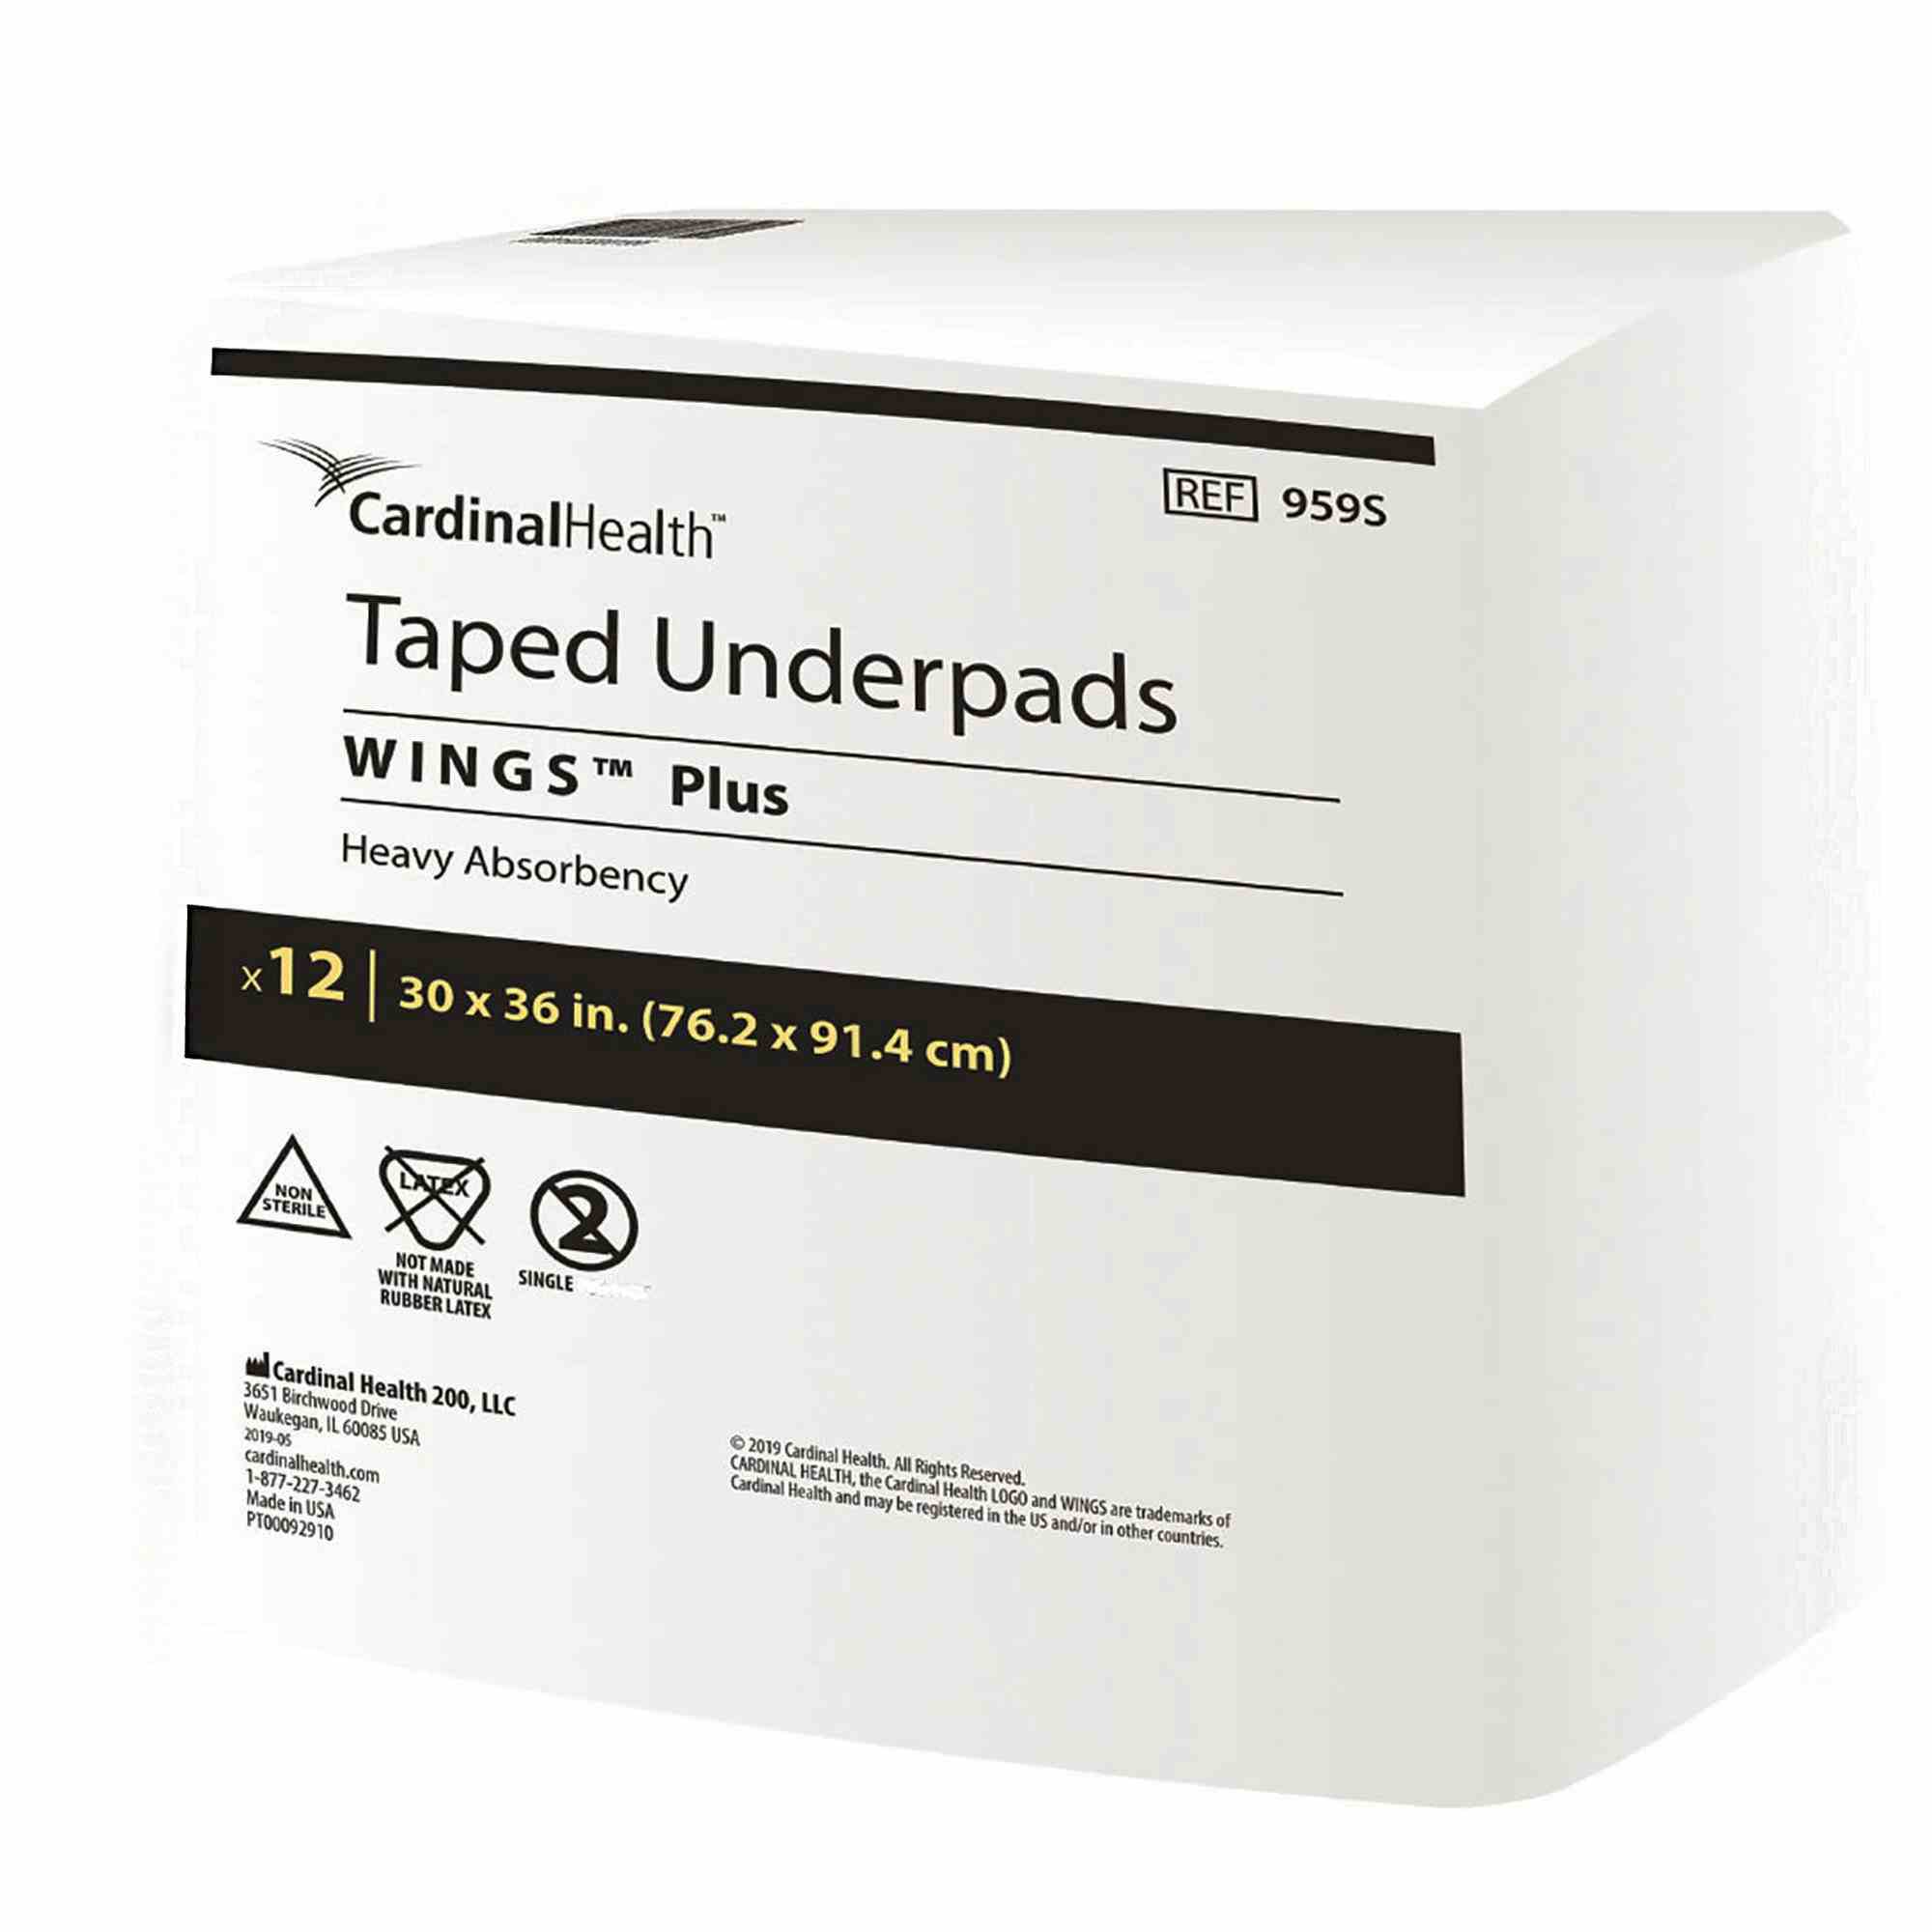 Wings Specialty Disposable Underpad, Heavy Absorbency, 959S, 30 X 36" - Case of 96 Pads (8 Bags)